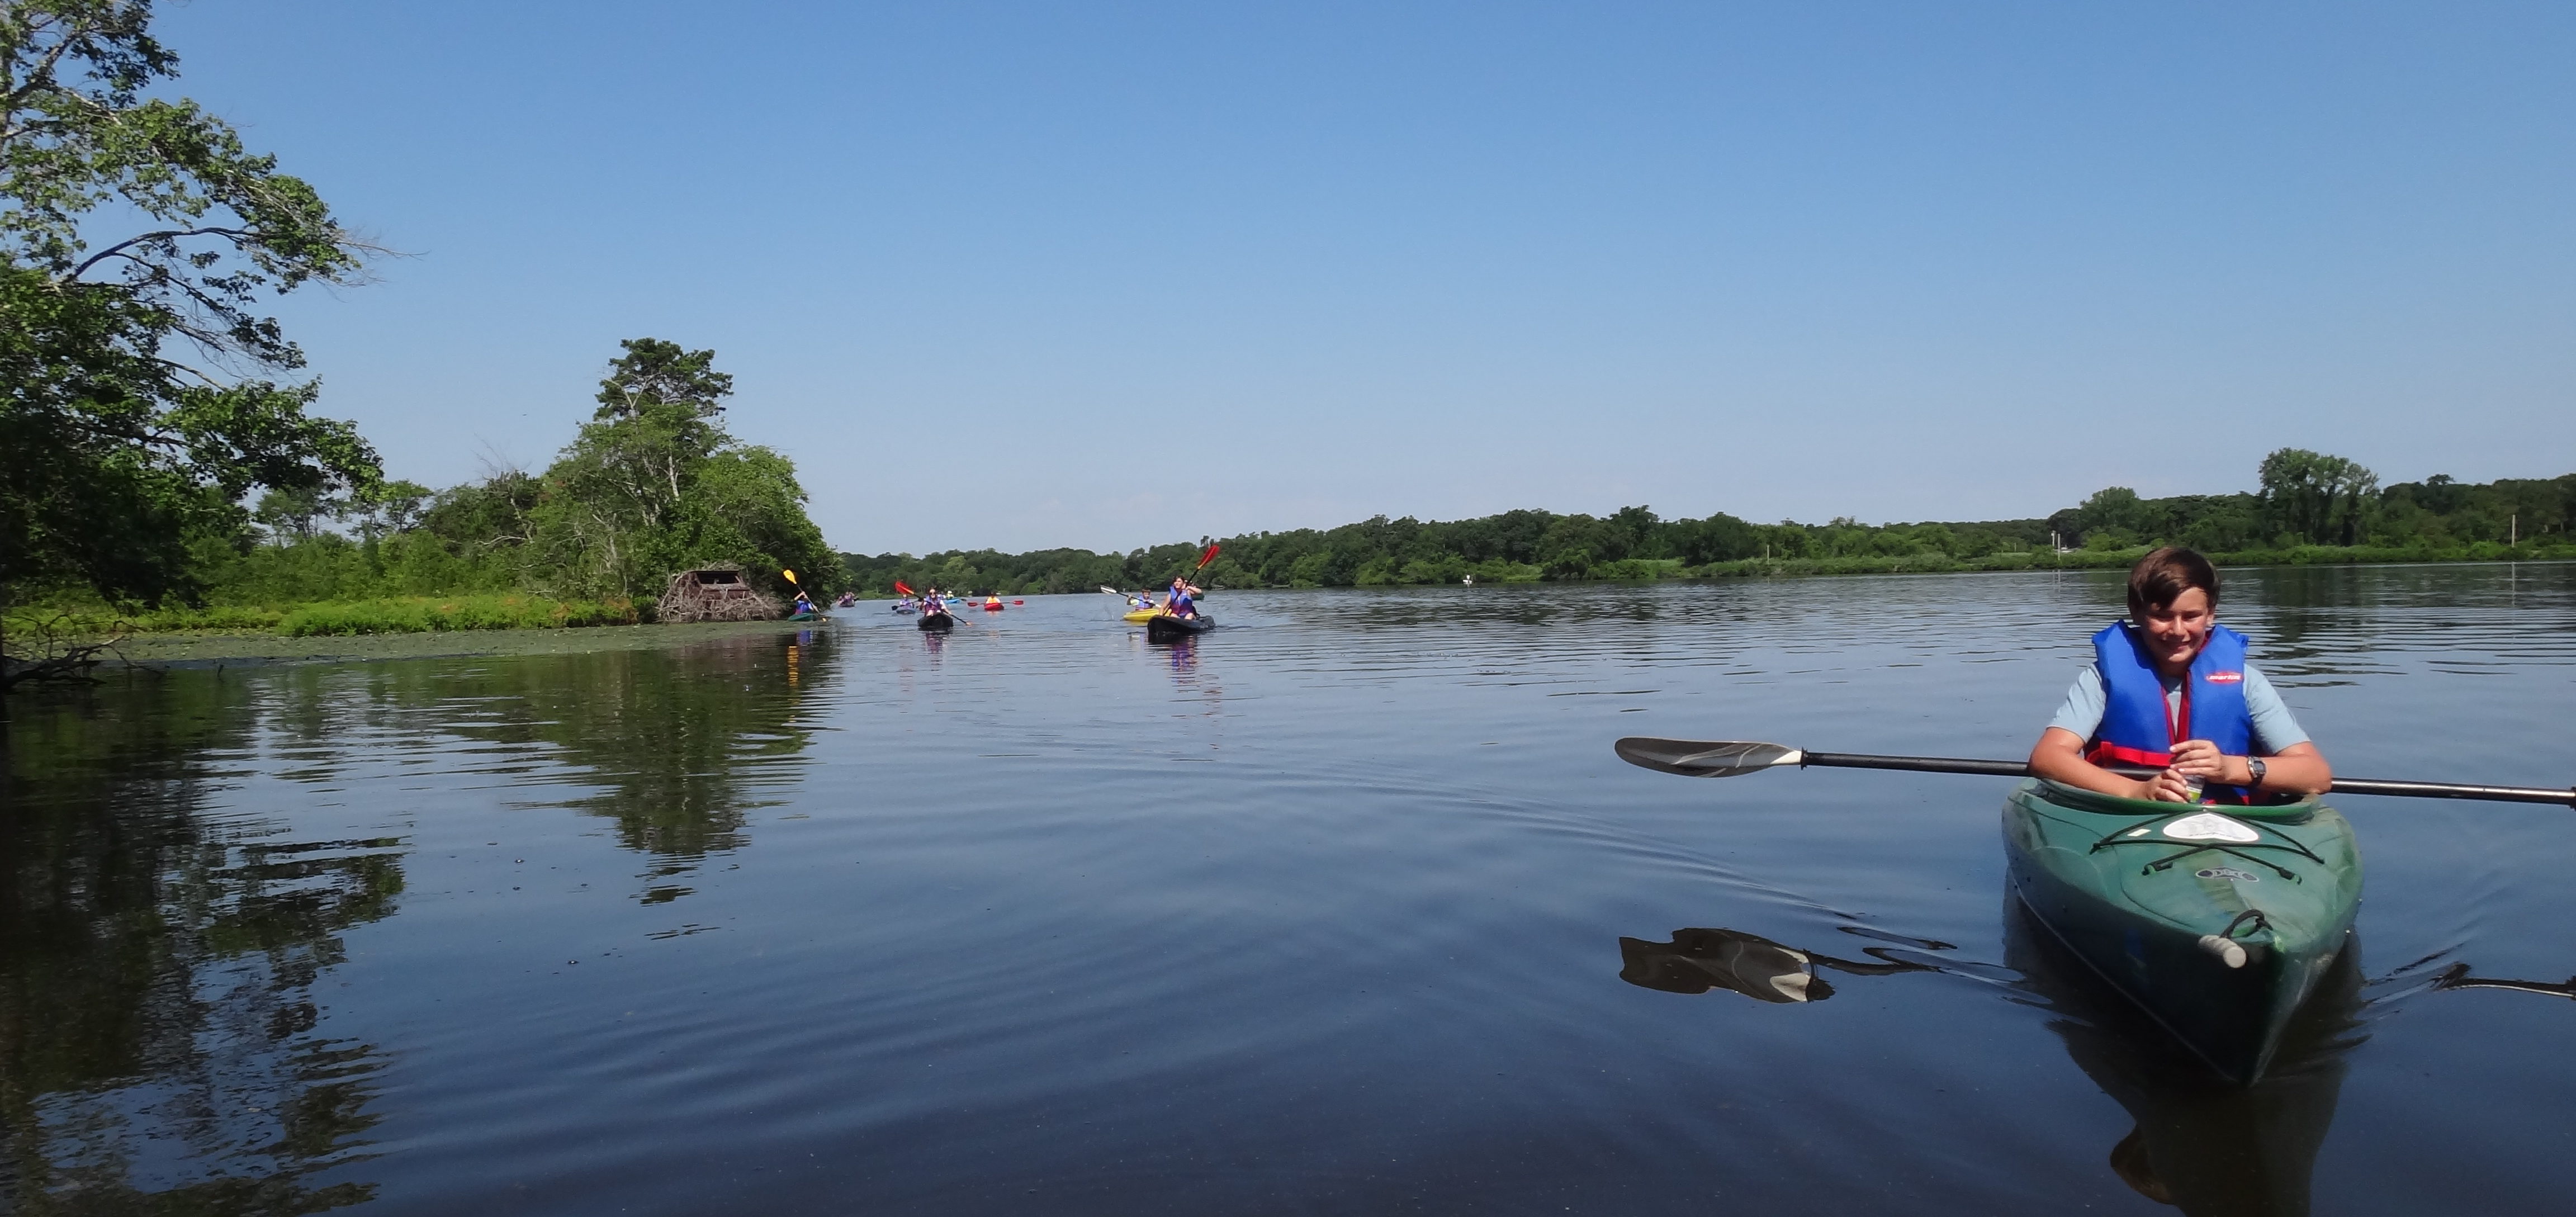 Kayakers paddling on the Peconic River.